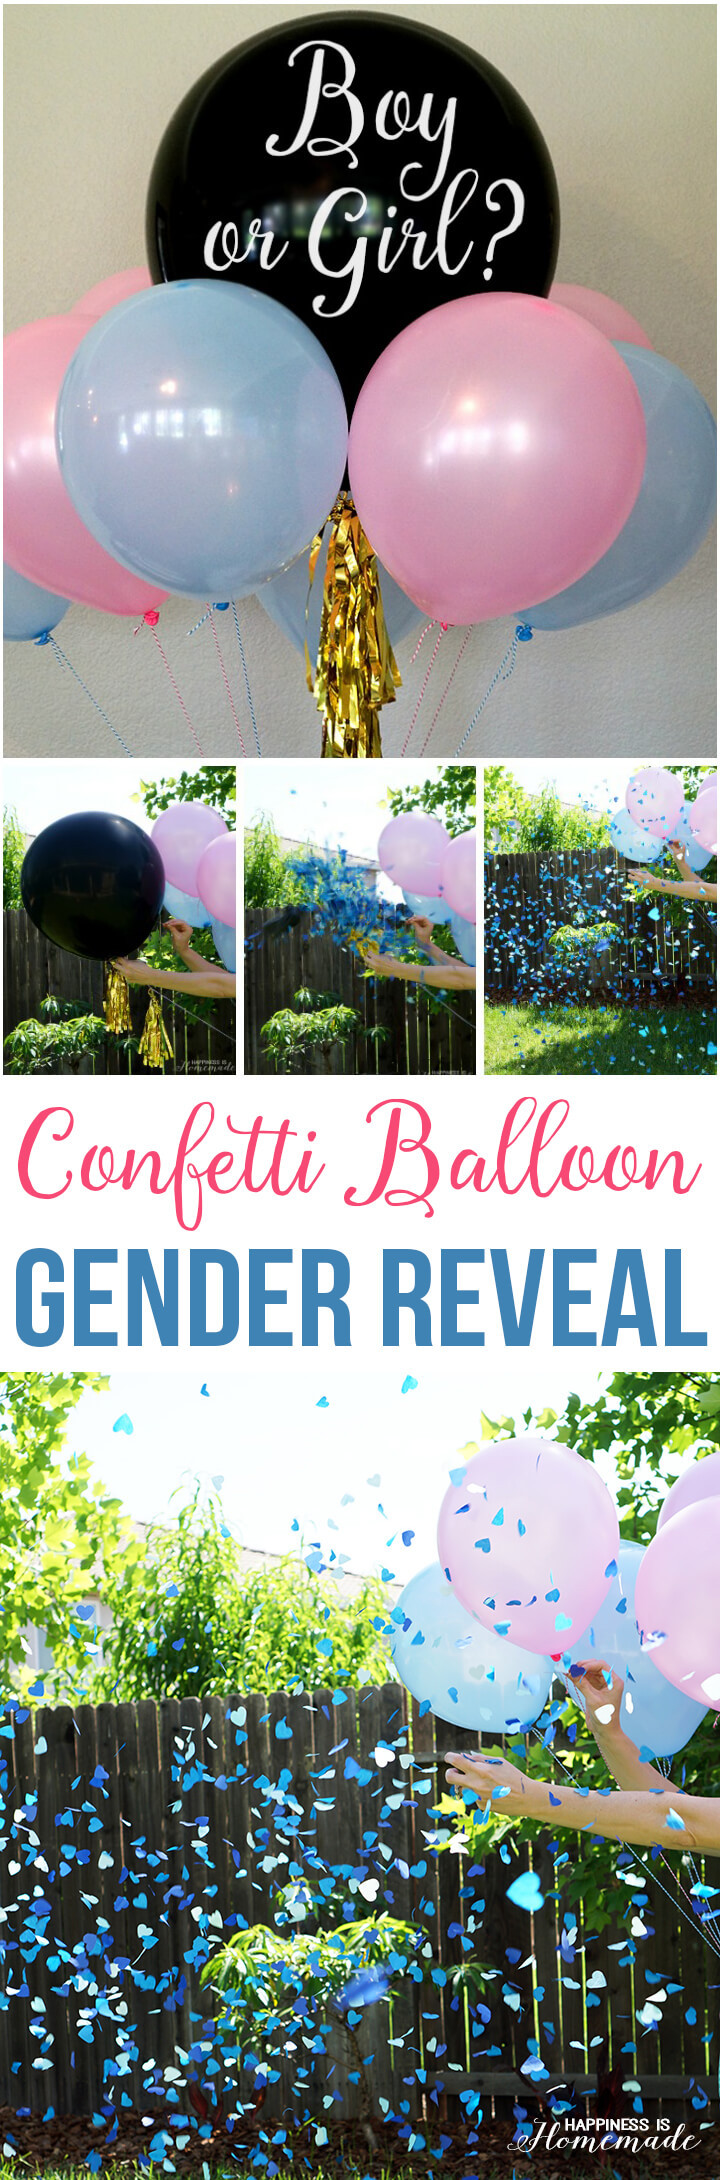 Gender Reveal Party Ideas Balloons
 Baby Gender Reveal Party Ideas Happiness is Homemade